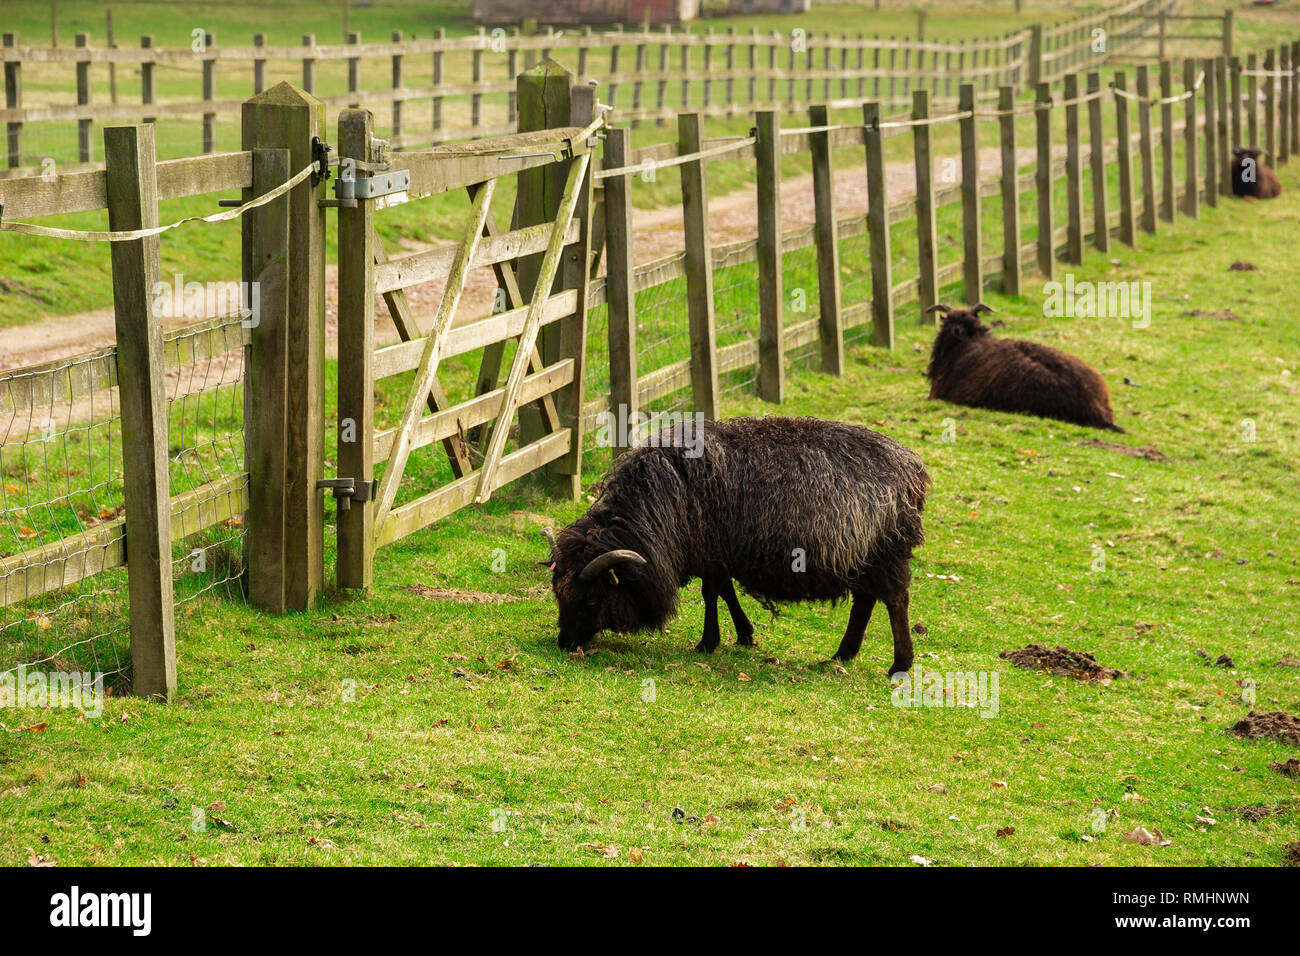 Black Sheep in a Field, Sandy, Bedfordshire, Royaume-Uni Banque D'Images